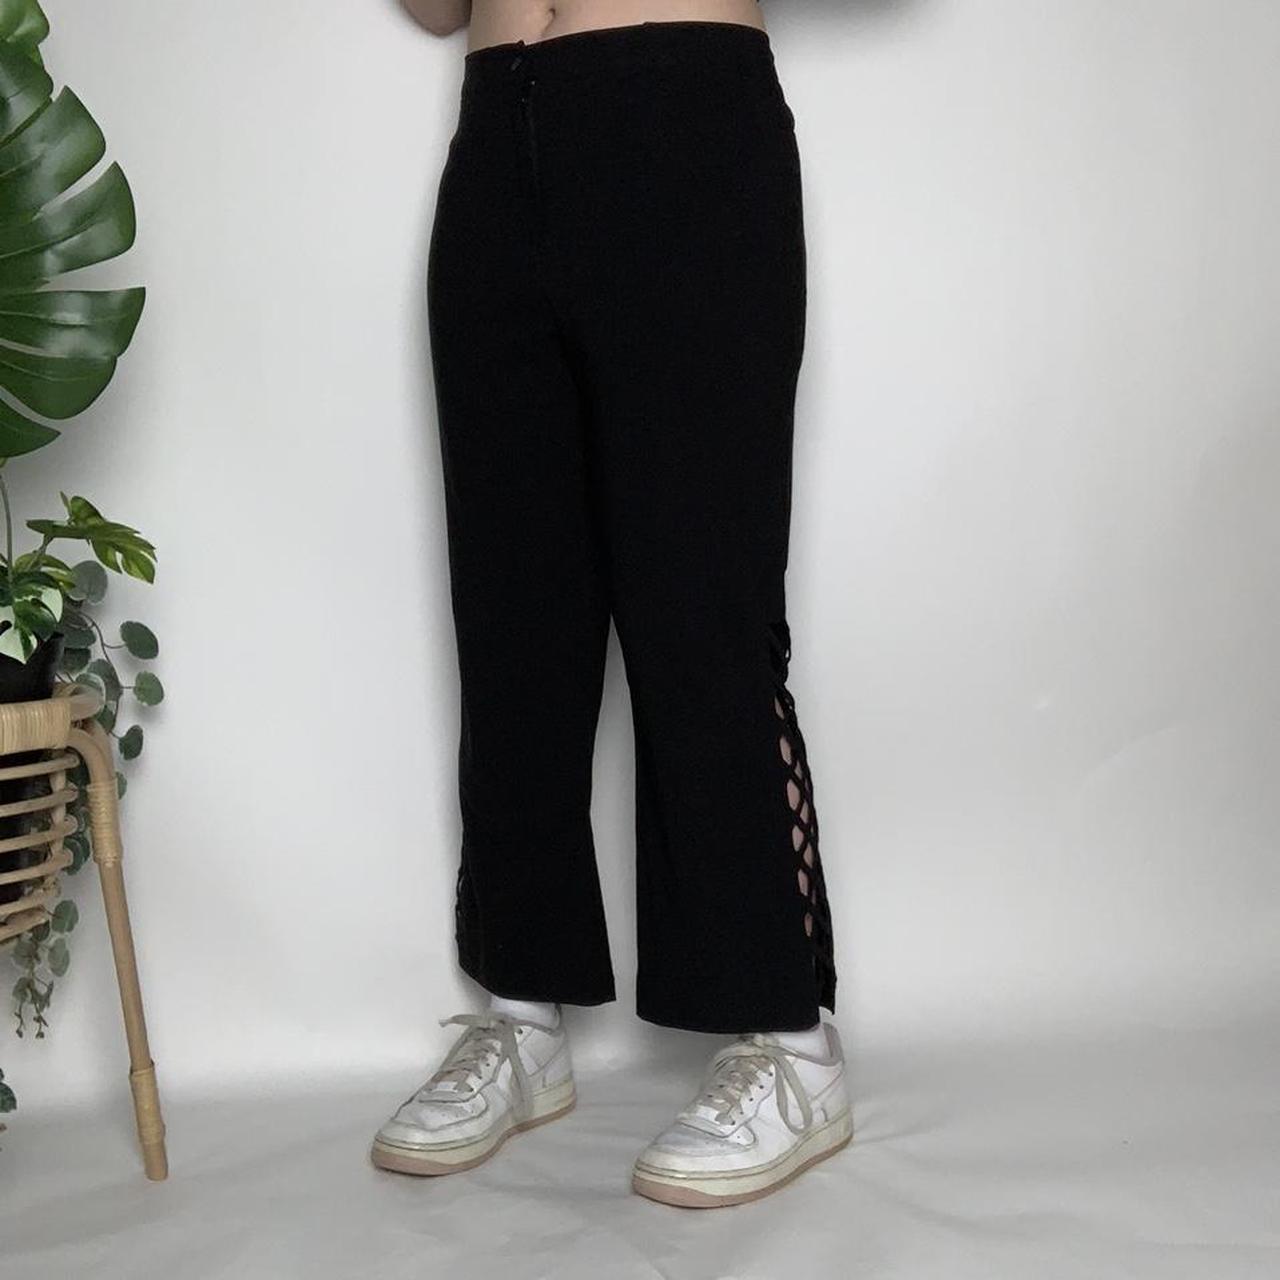 Vintage 90s black flared trousers with crisscross cut-out detailing